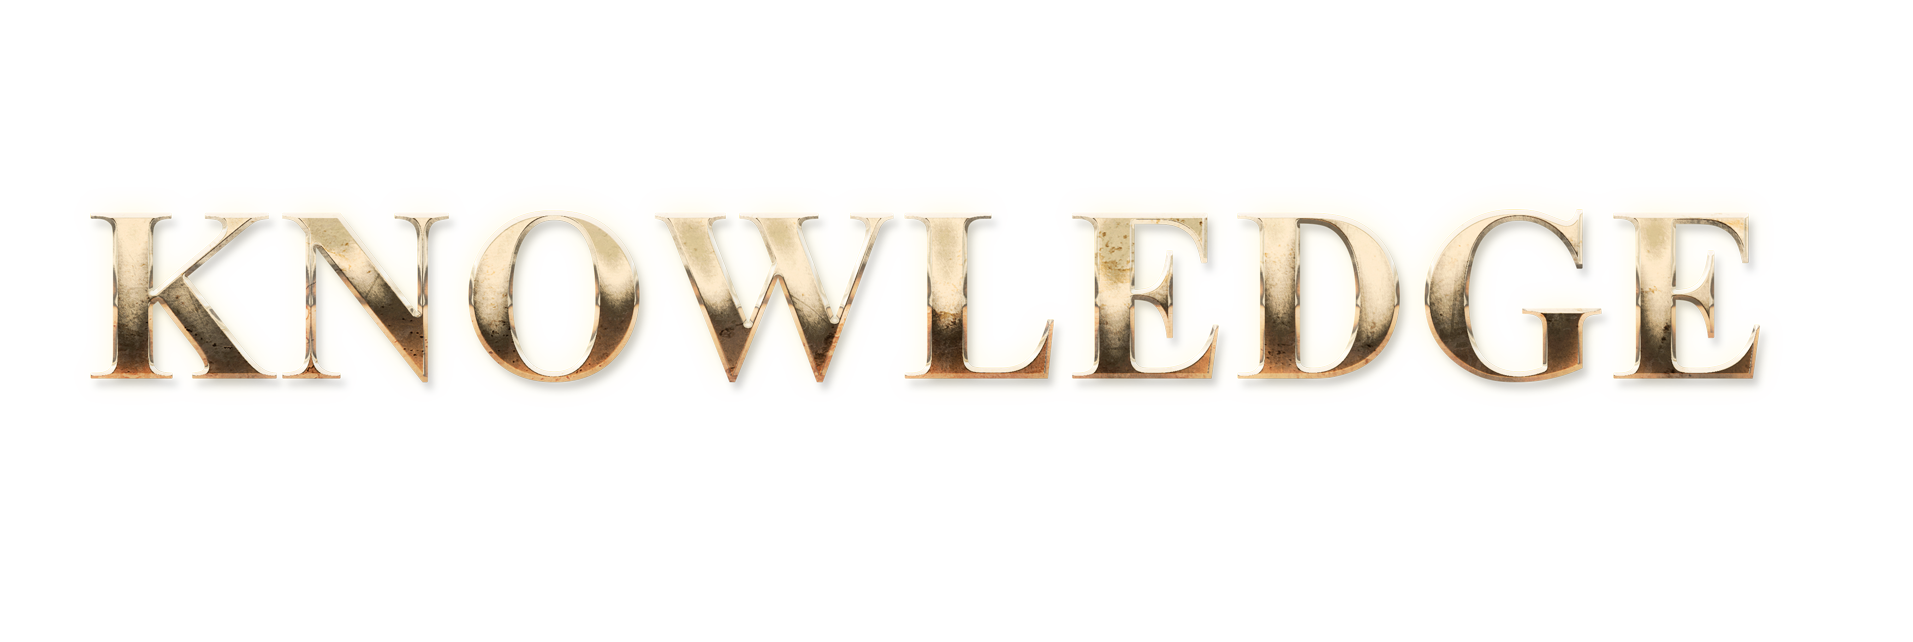 WORD KNOWLEDGE gold text effects art typography PNG images free